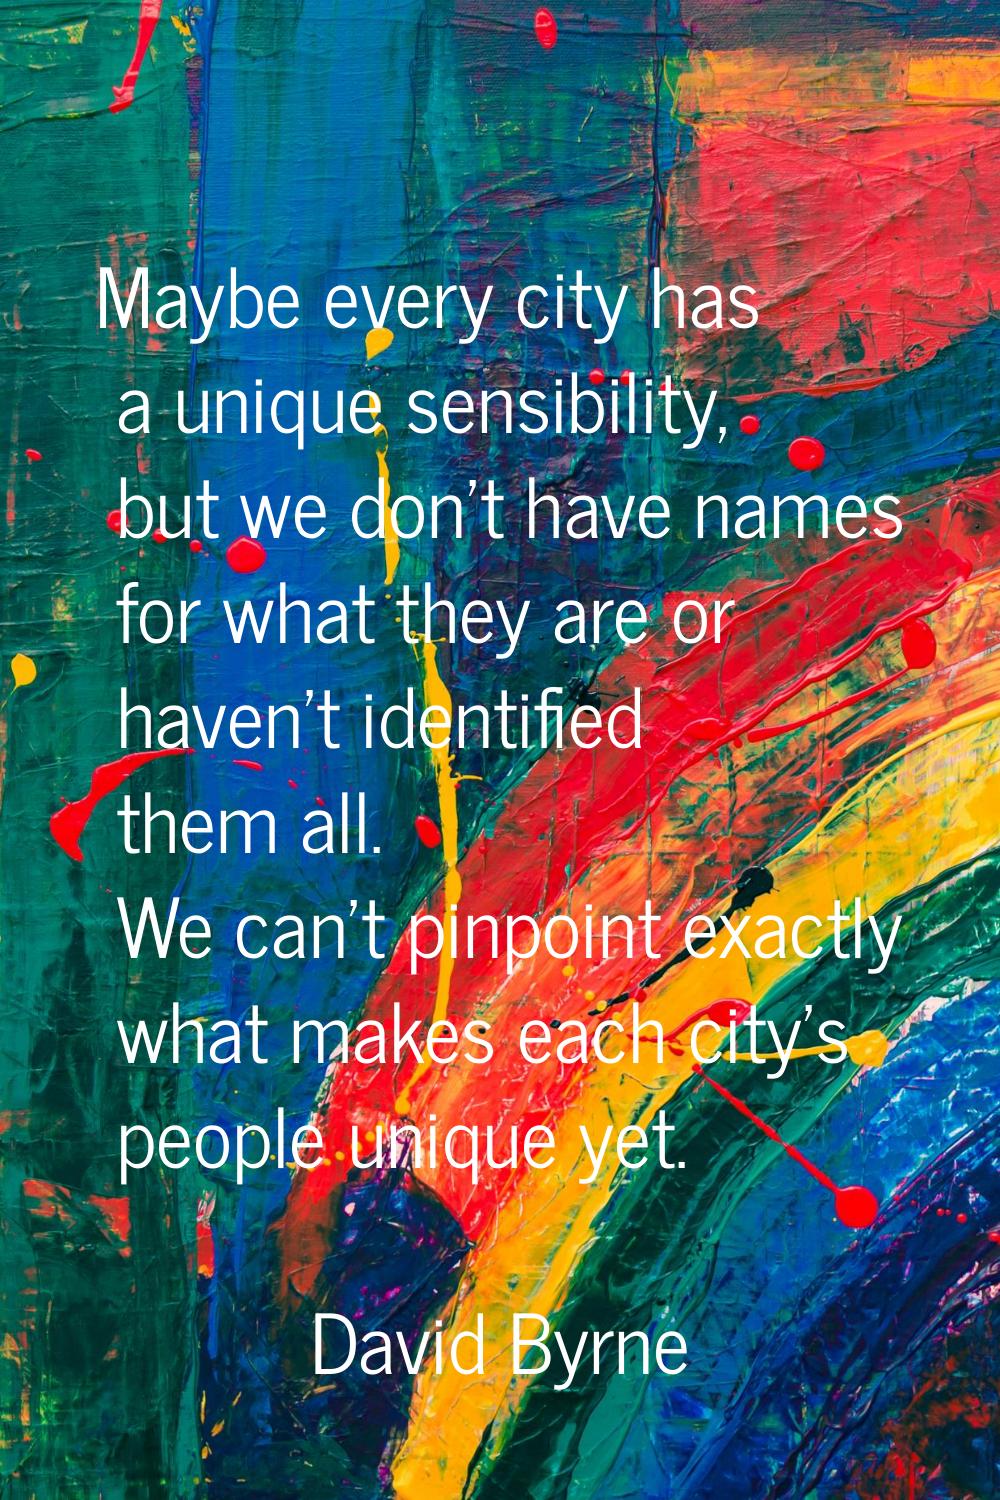 Maybe every city has a unique sensibility, but we don't have names for what they are or haven't ide